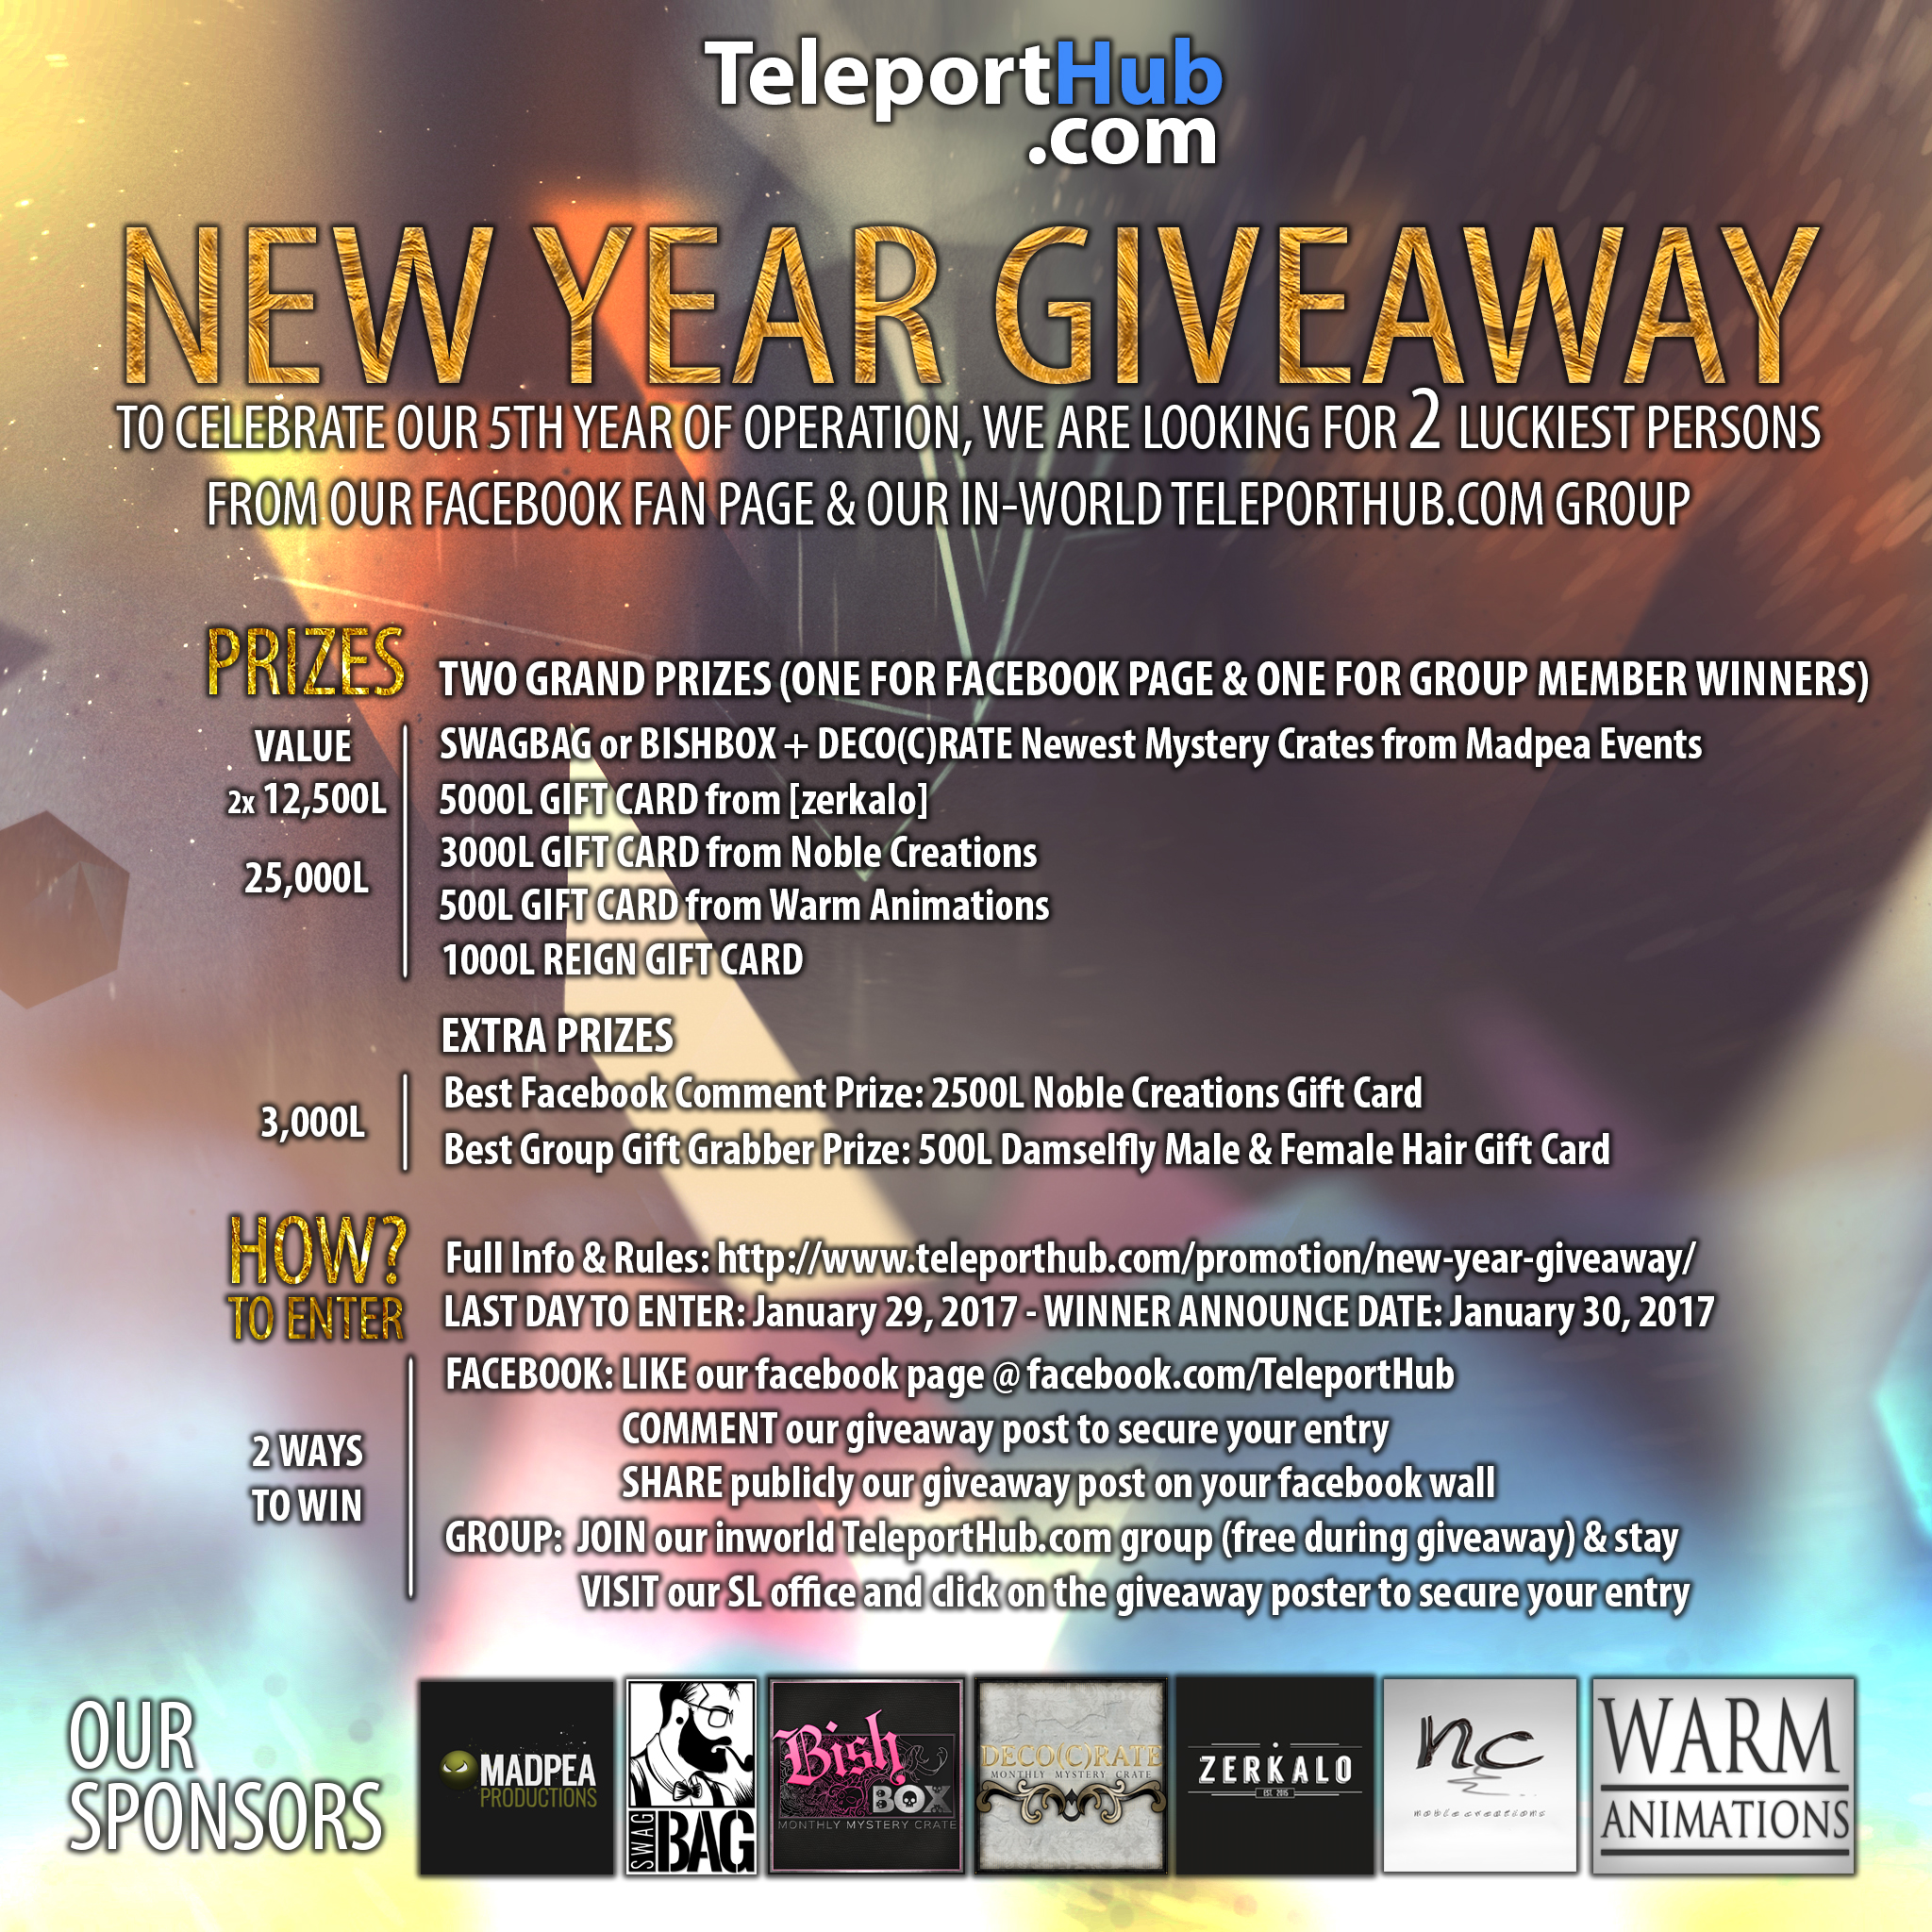 TeleportHub.com's New Year Giveaway